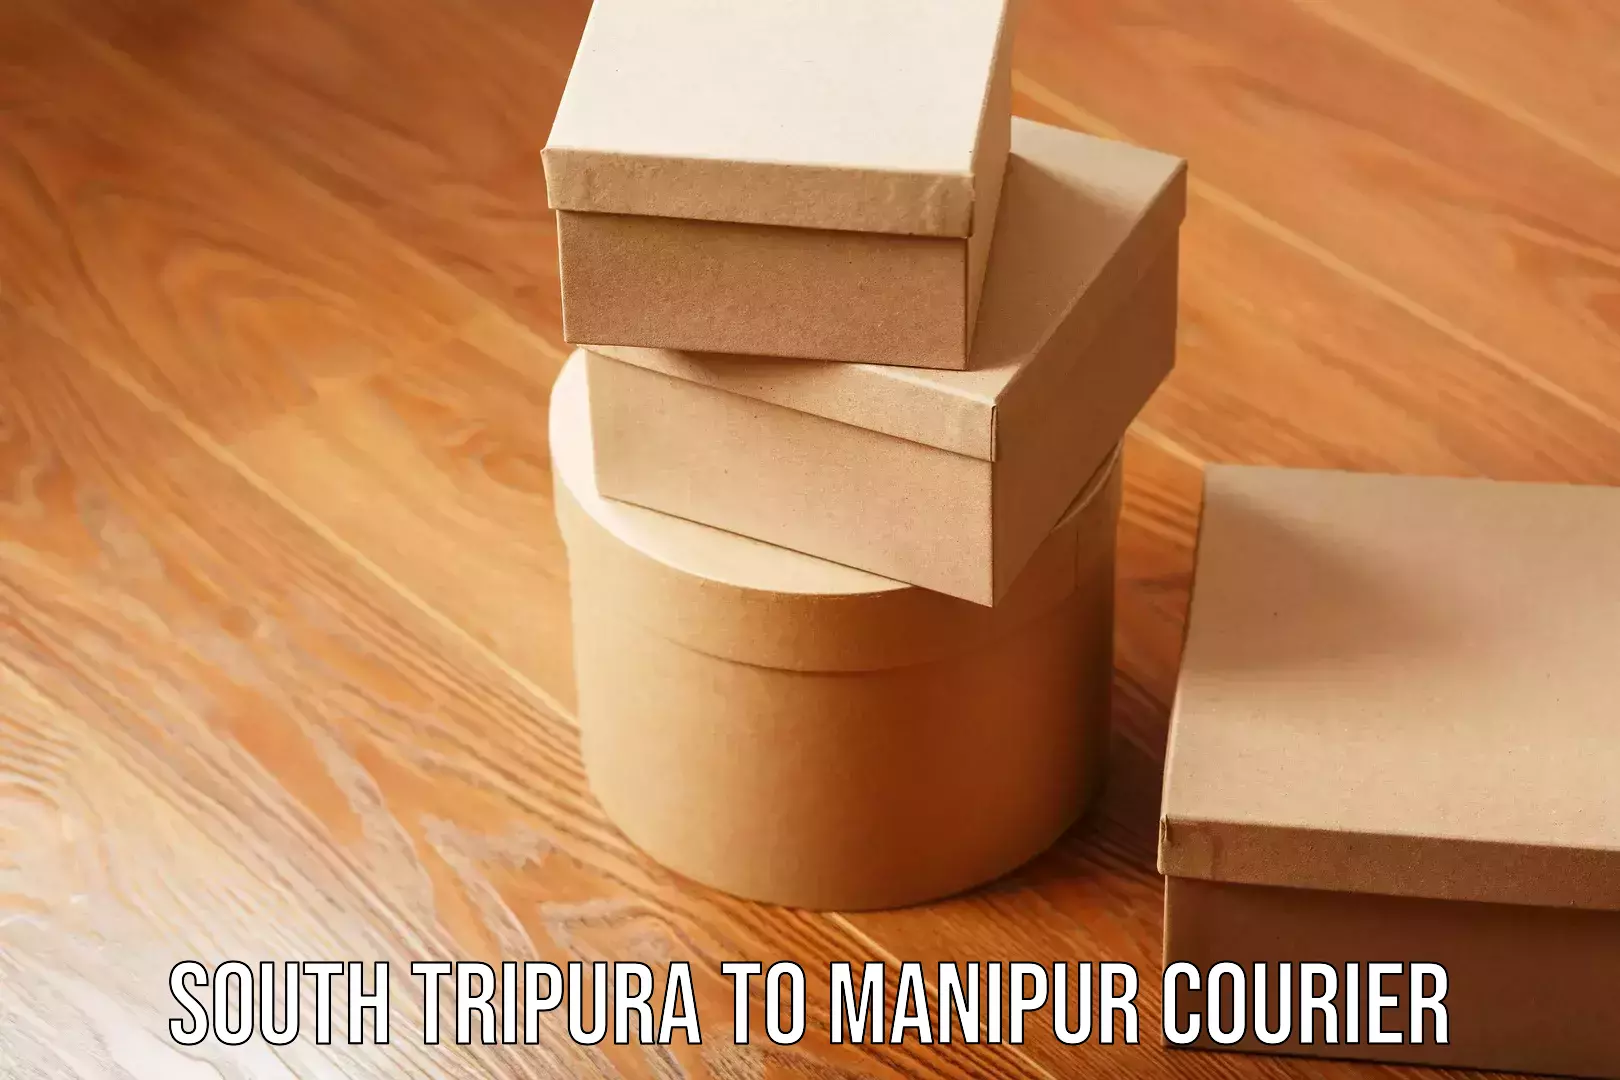 Cash on delivery service in South Tripura to Manipur